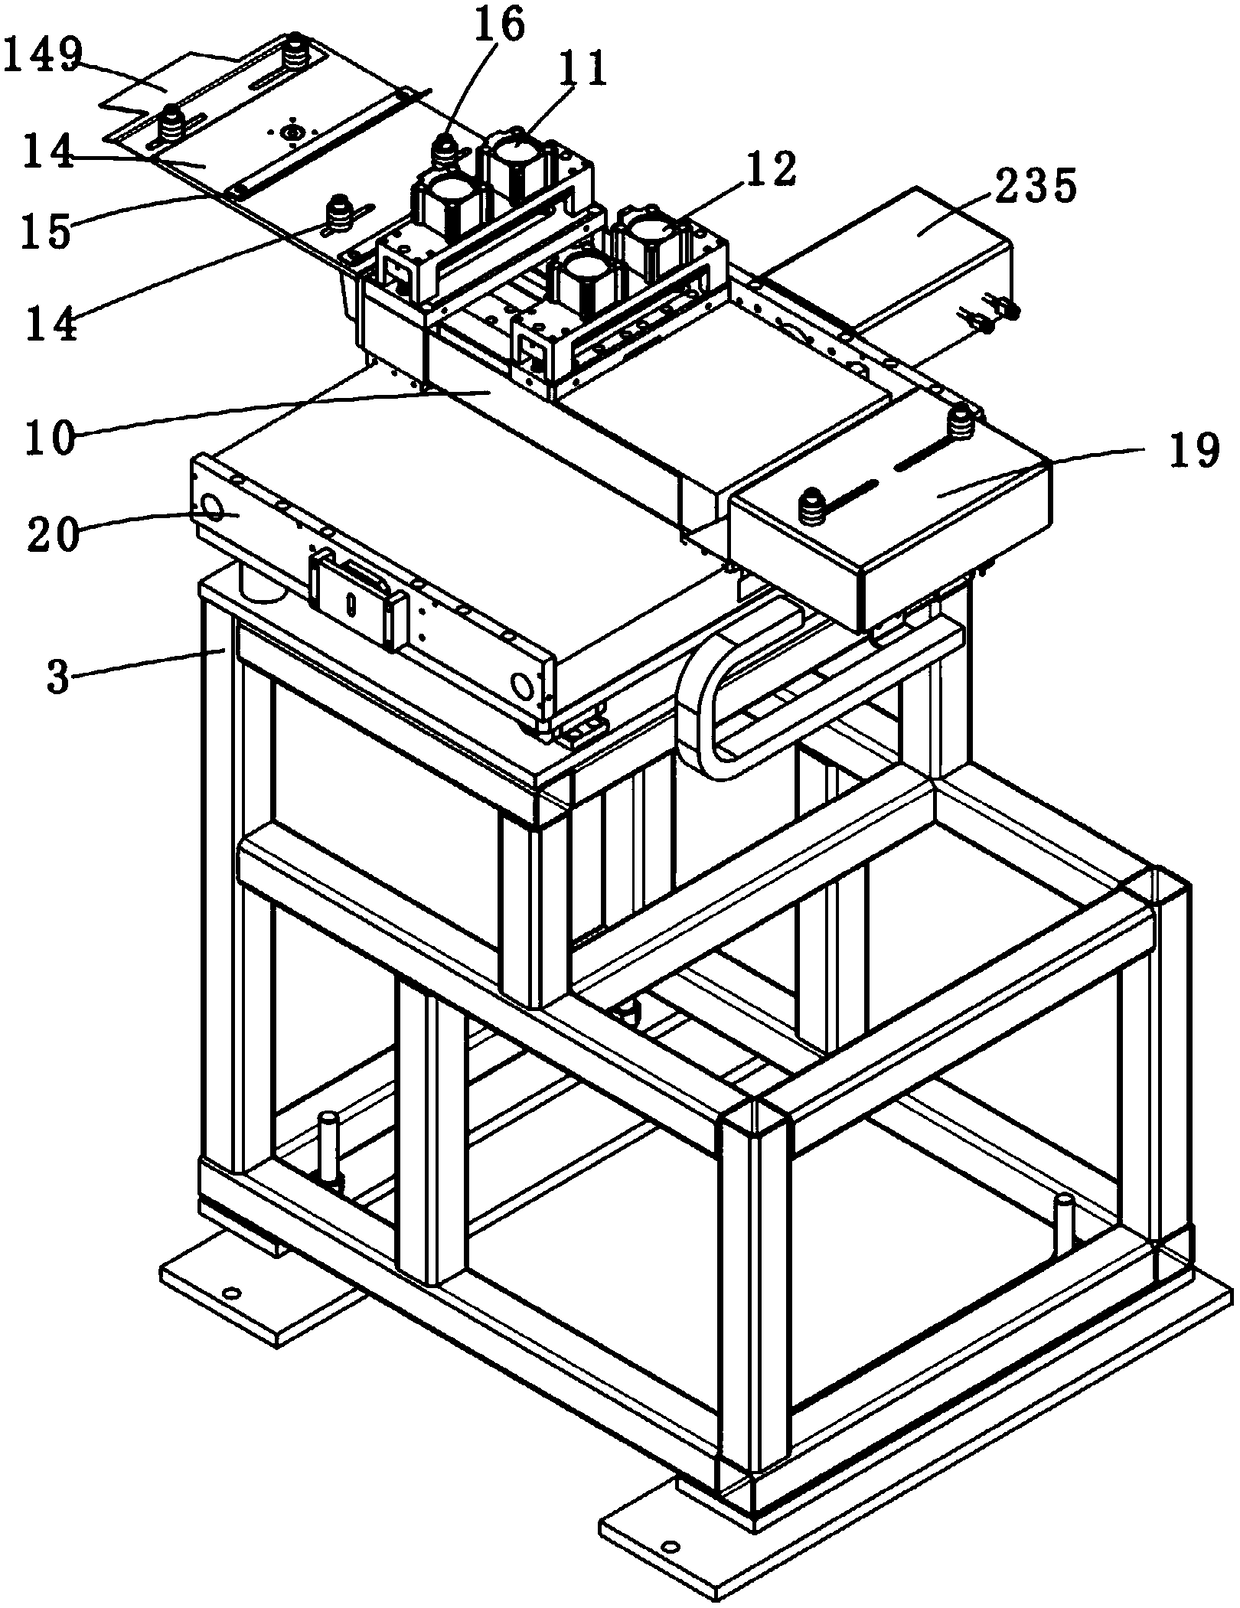 Stamping and feeding device of high-grade steel